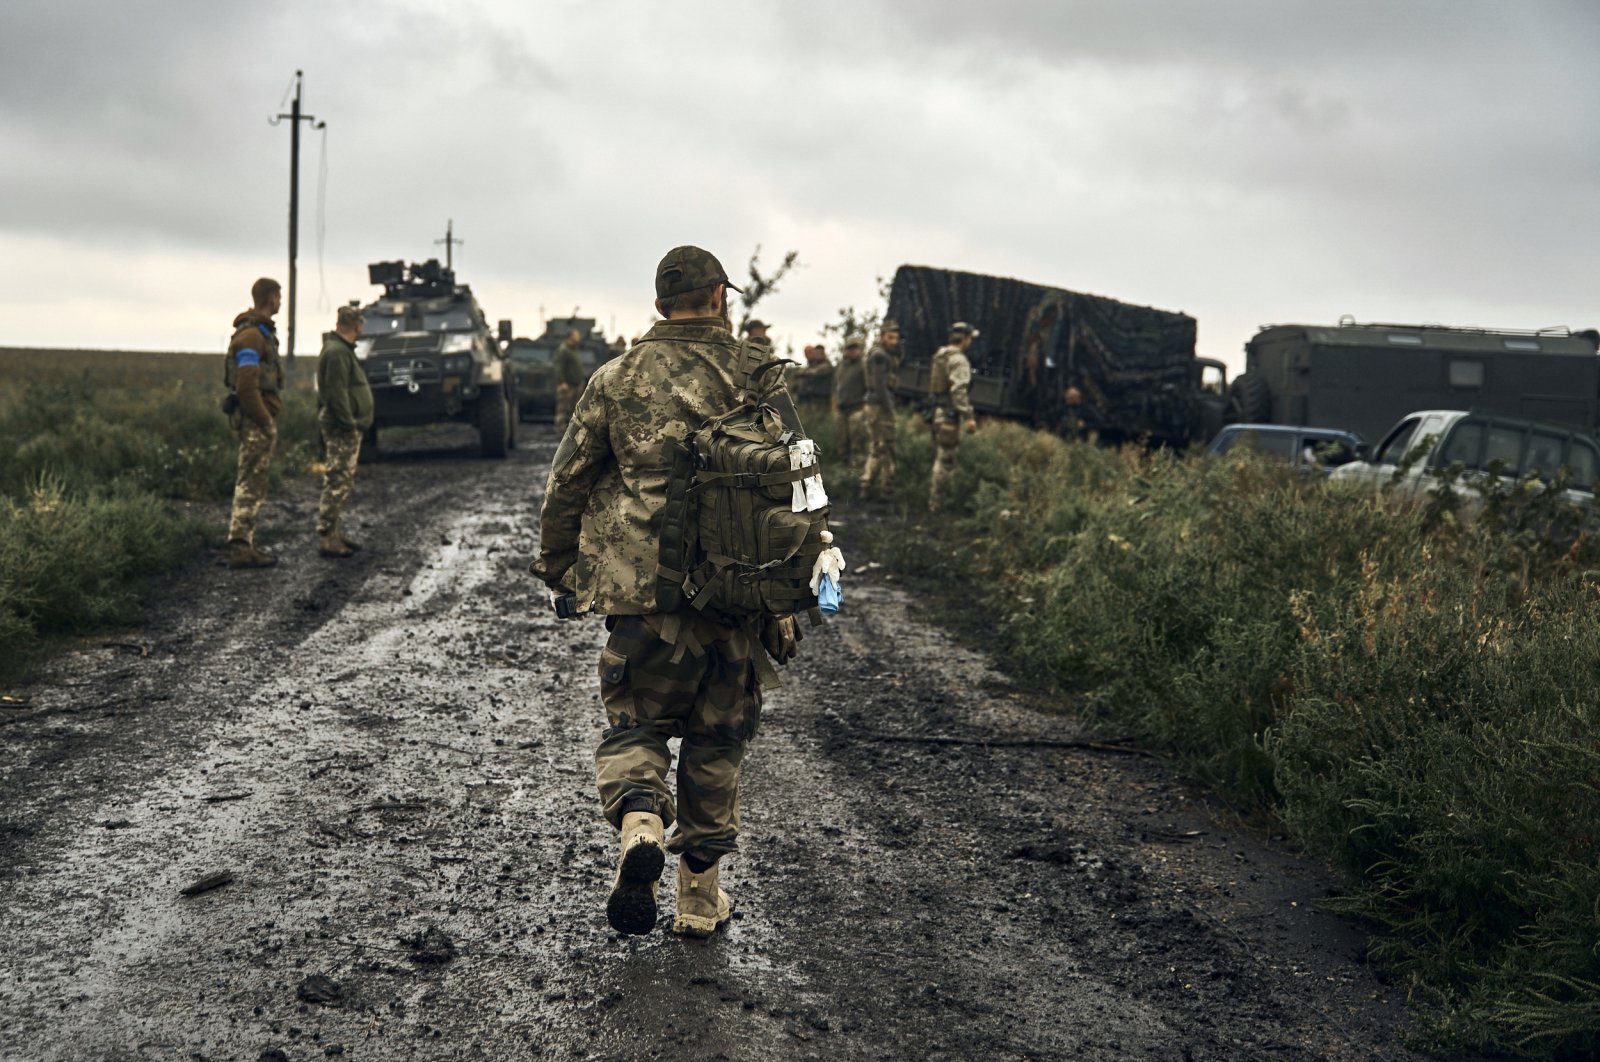 Ukrainian soldiers stand on the road in the freed territory of the Kharkiv region, Ukraine, Sept. 12, 2022. (AP Photo)